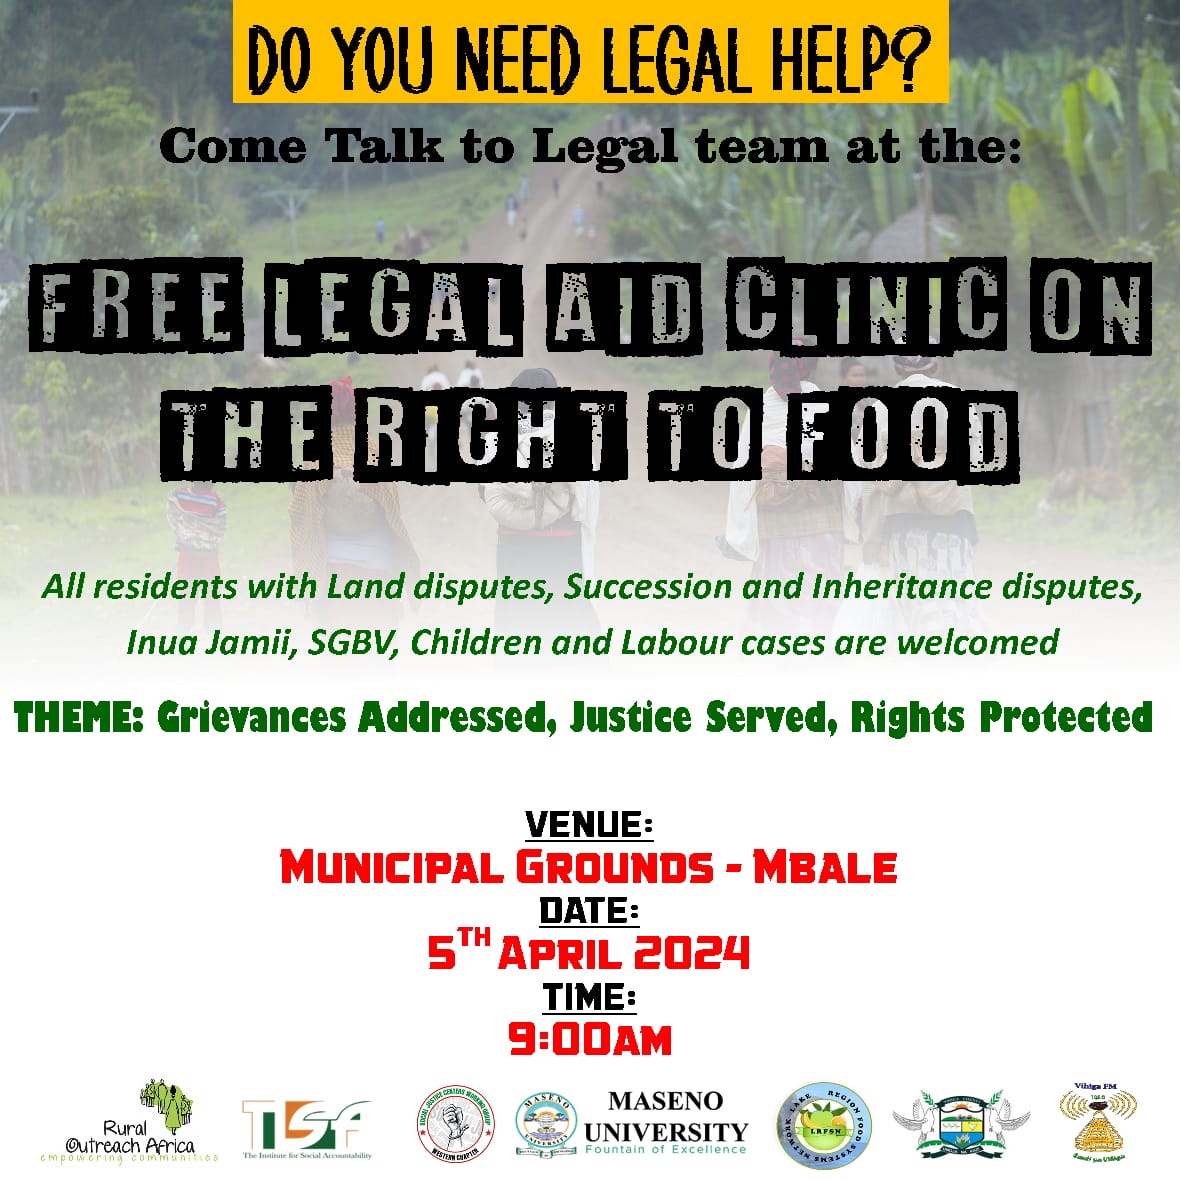 Food is a fundamental right that need to be protected. You are invited to a Free Legal clinic on the Right to Food; come talk to our legal team on issues that affect access to quality food and any injustice that arise from safeguarding this basic right; keep the date, 5th April.